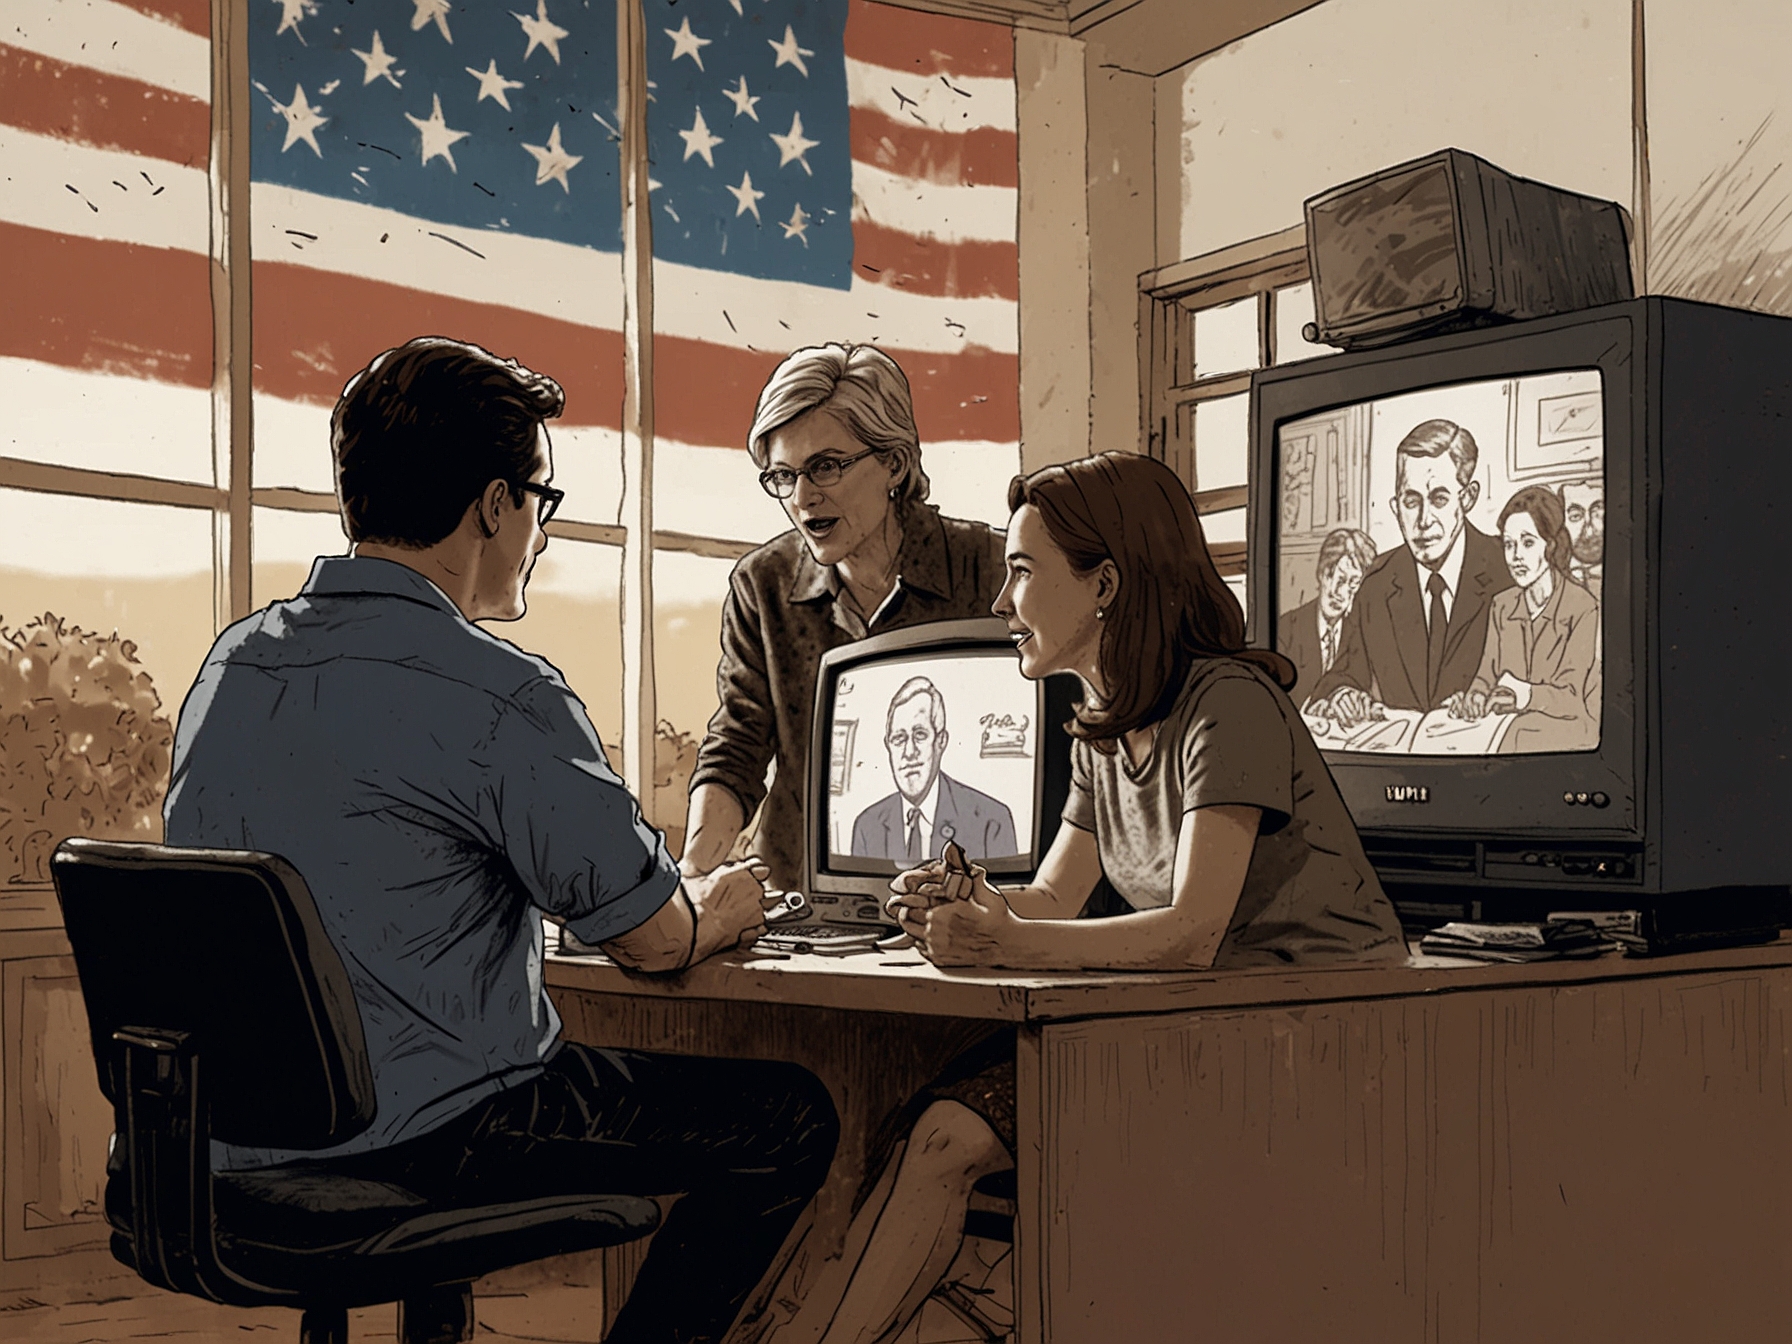 Image of a family gathered around their TV, showcasing the various ways Americans can tune into the presidential debate, highlighting community engagement.